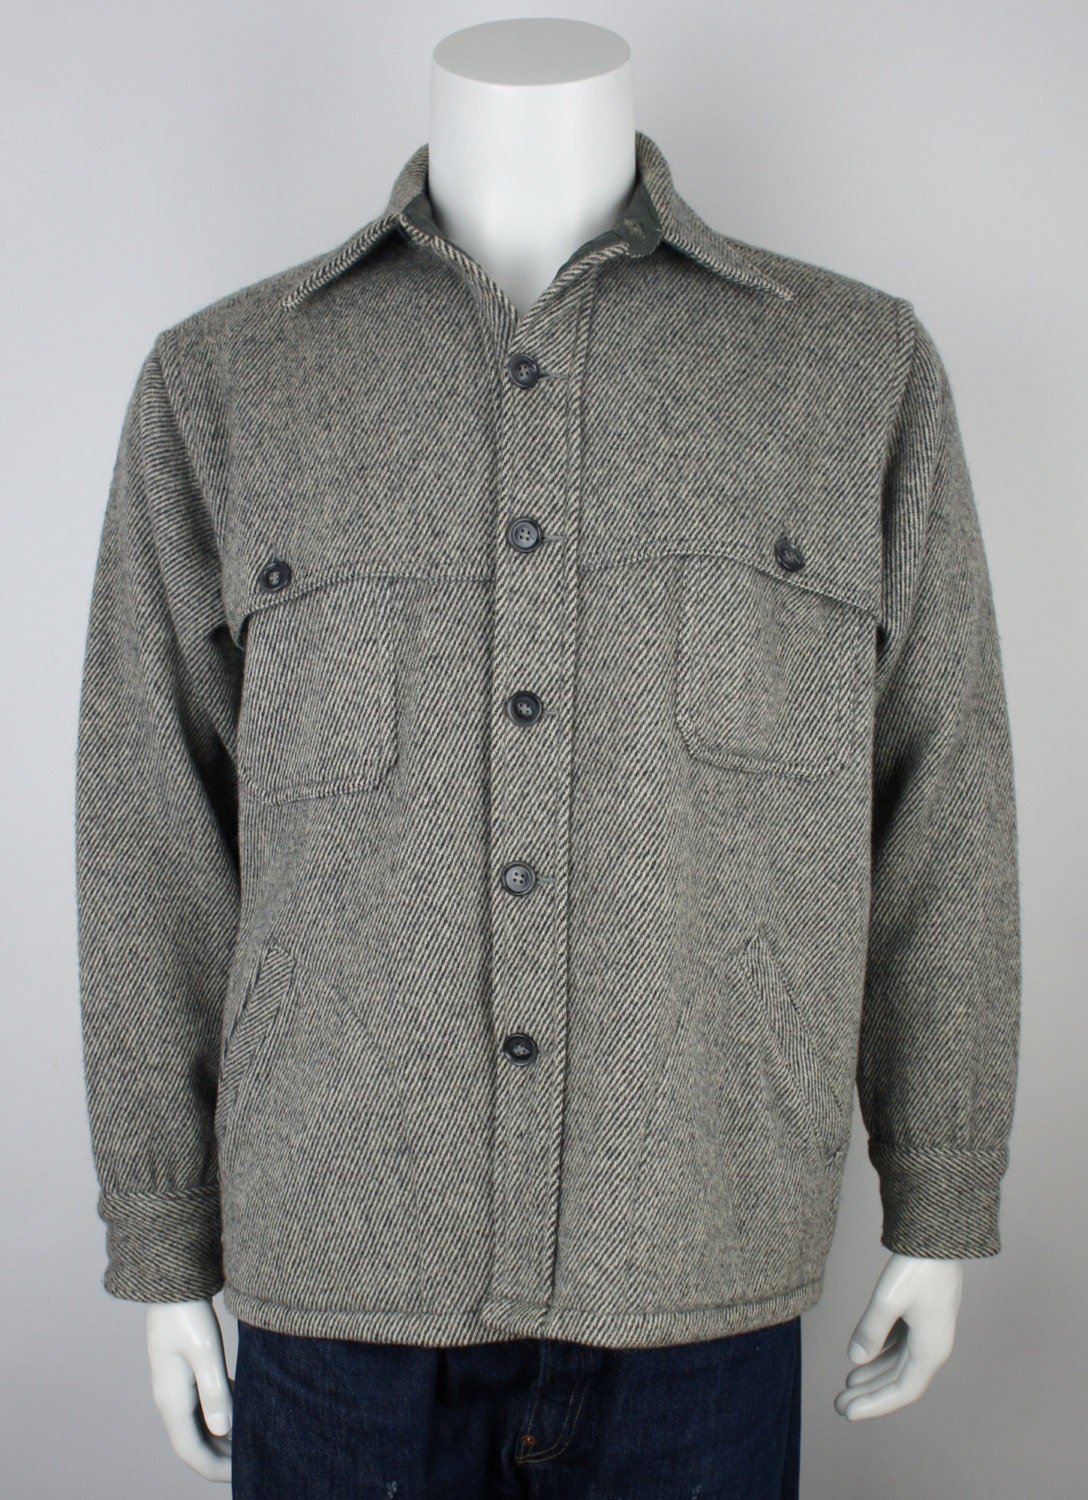 Vintage Woolrich Wool CPO Jacket size XL by foundationvintage